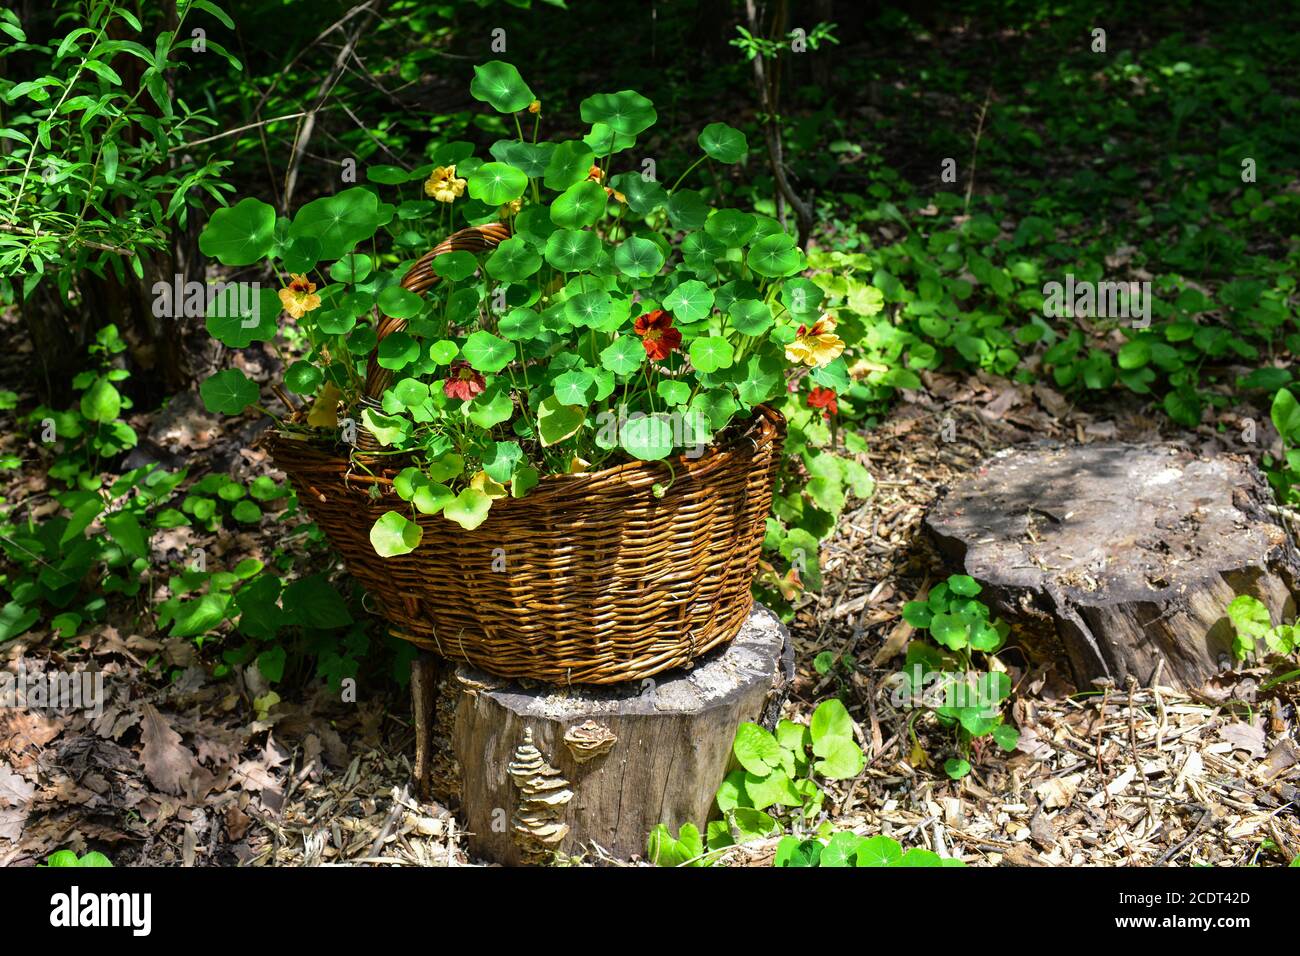 Basket with spring flowers in the garden. Stands on a wooden tree stump. On a bright sunny spring day. Stock Photo